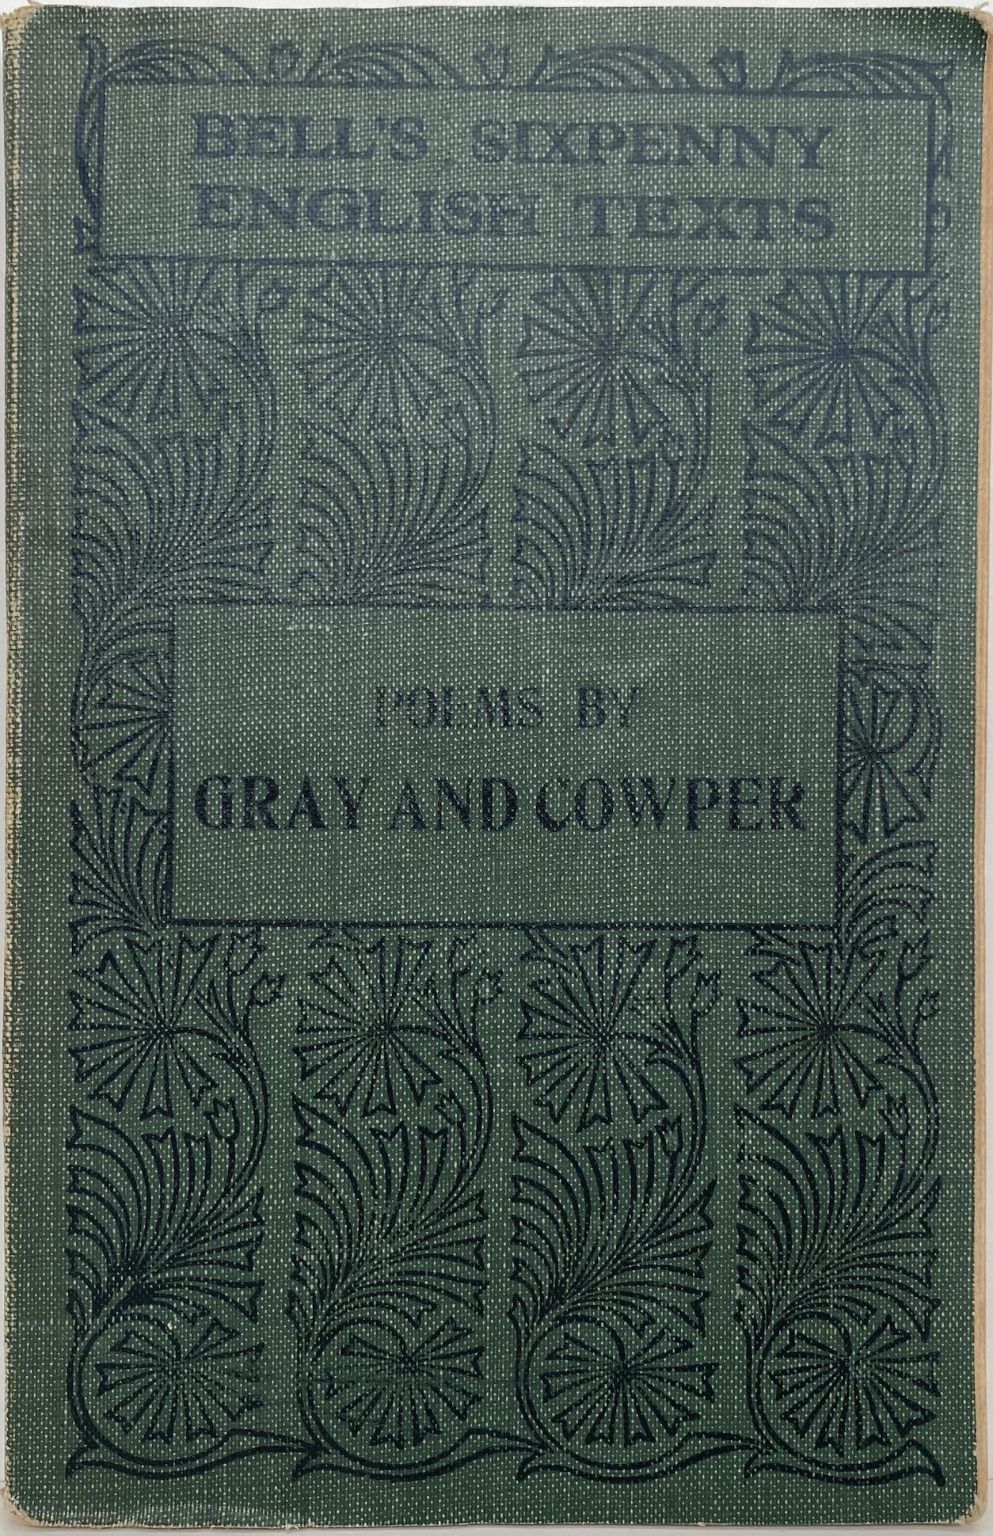 POEMS BY GRAY AND COWPER: Bell's Sixpenny English Texts